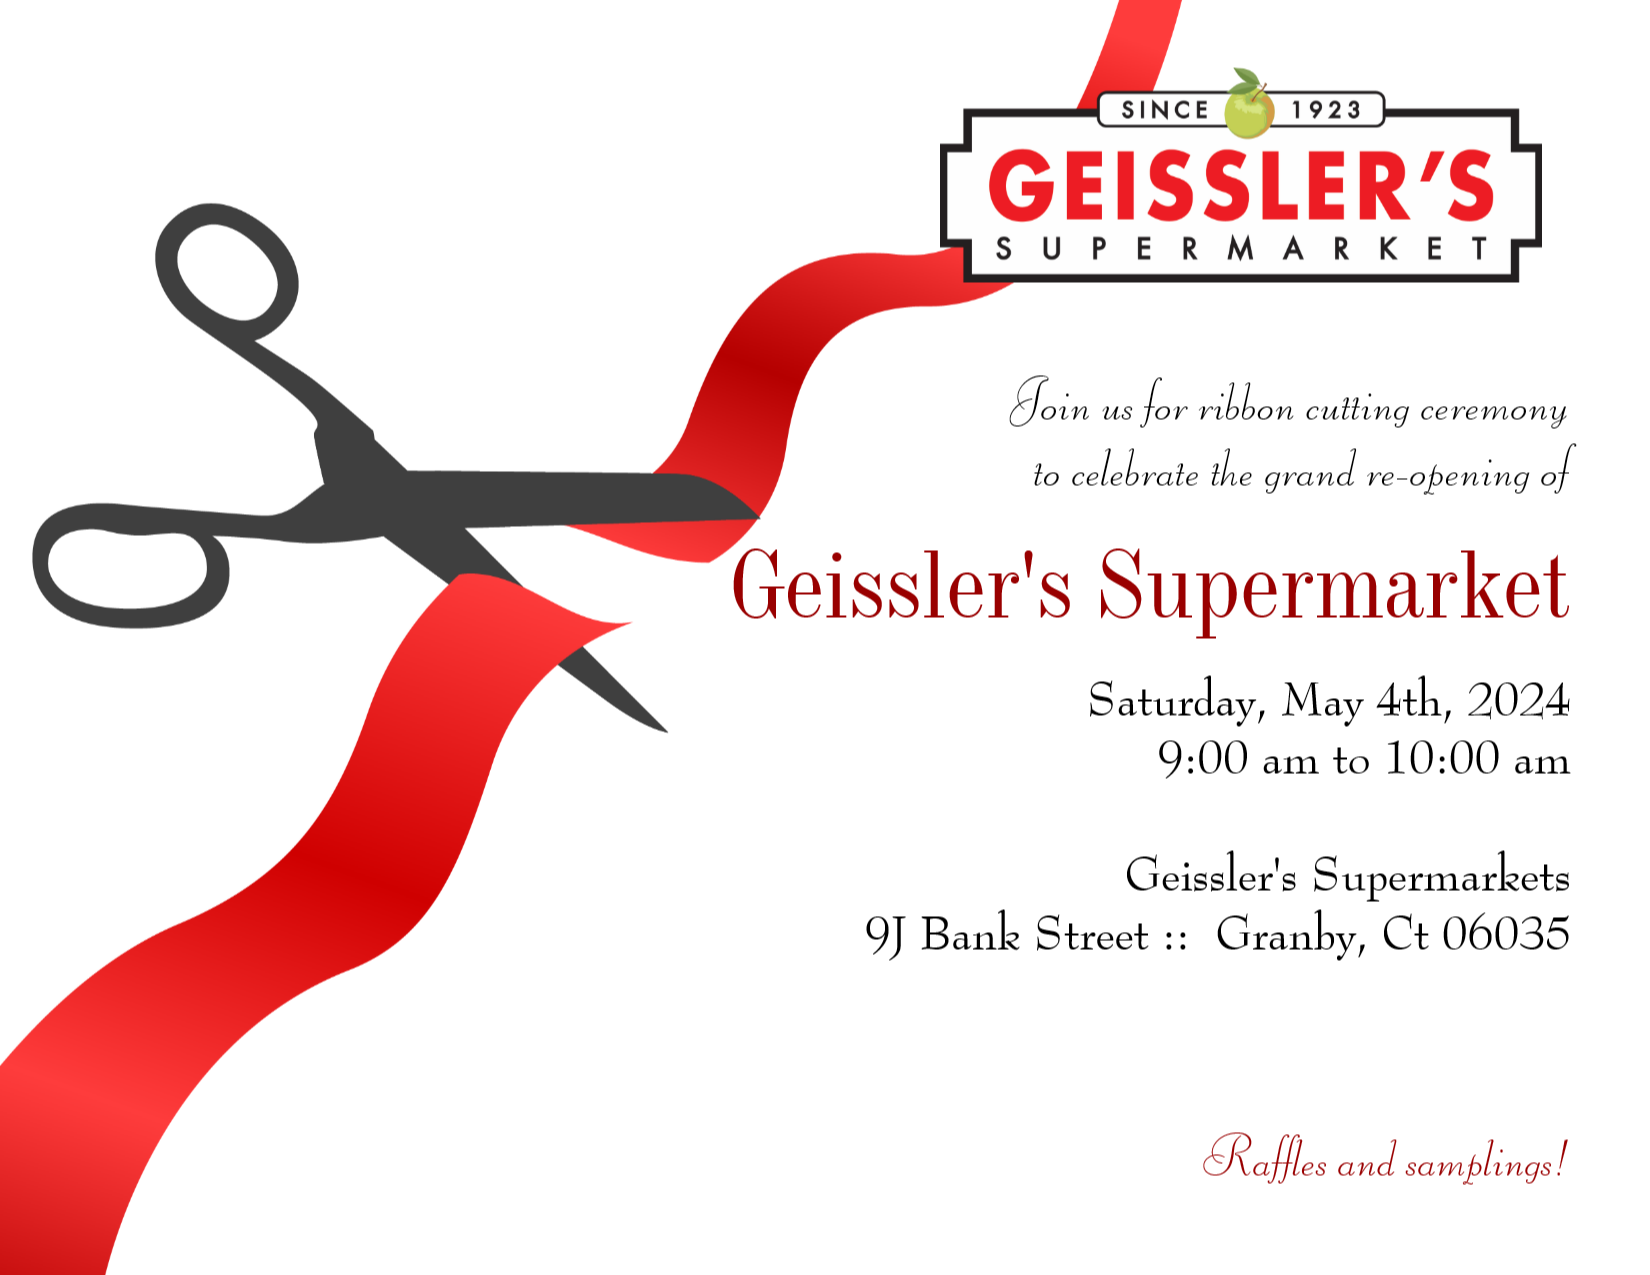 You are invited to the Grand Re-Opening of Geissler's Granby Store